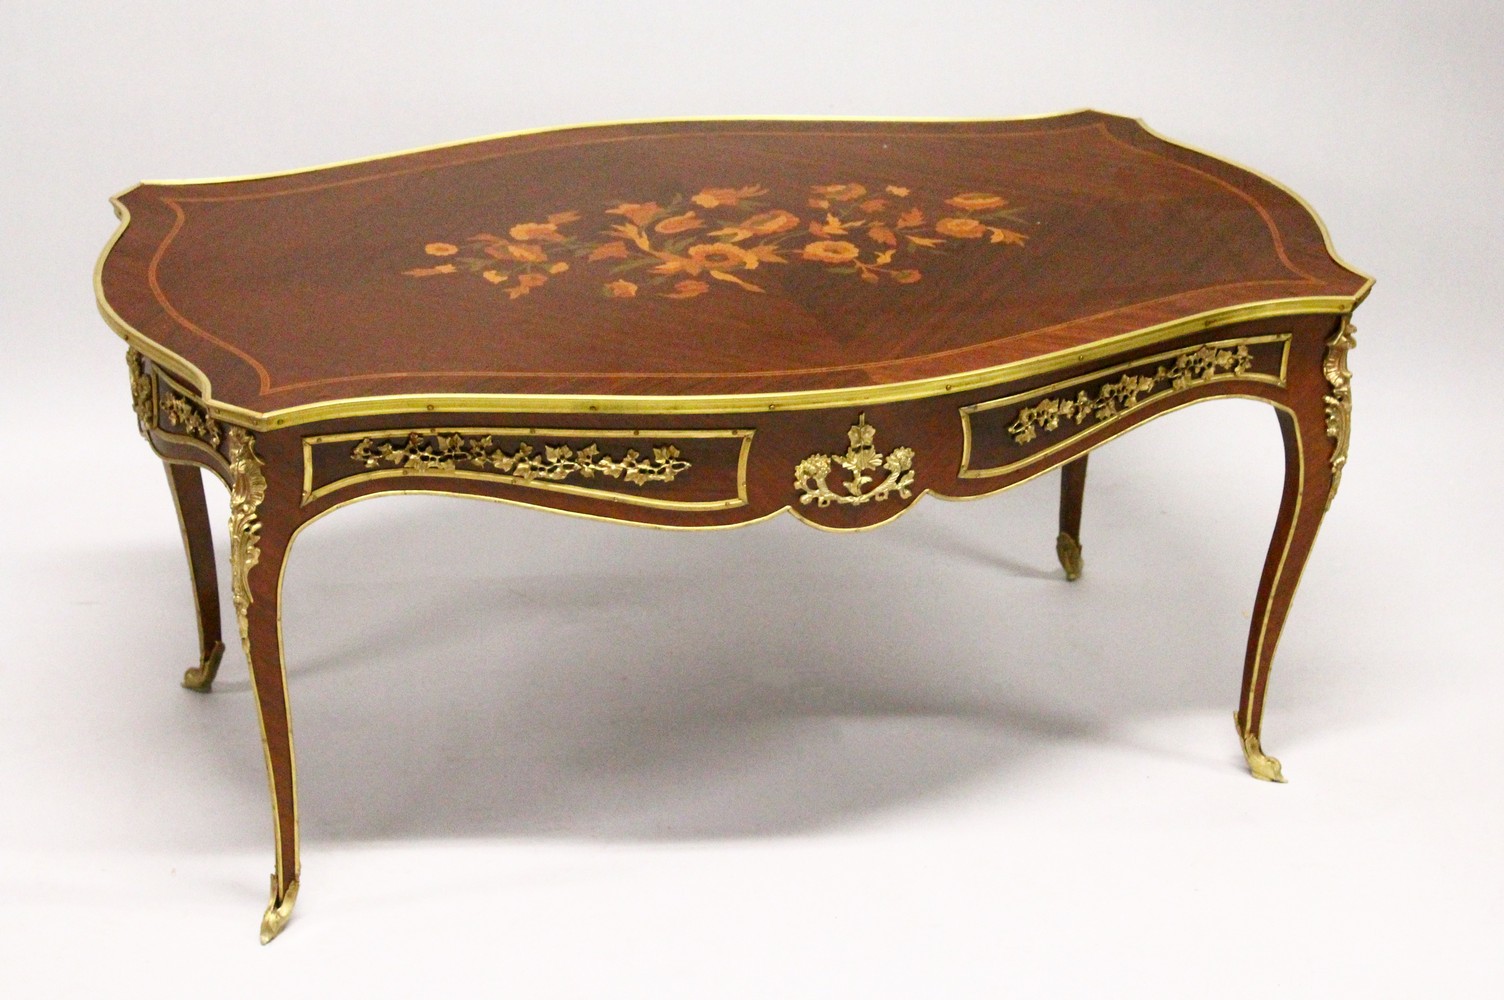 A FRENCH STYLE INLAID MAHOGANY AND ORMOLU MOUNTED COFFEE TABLE.